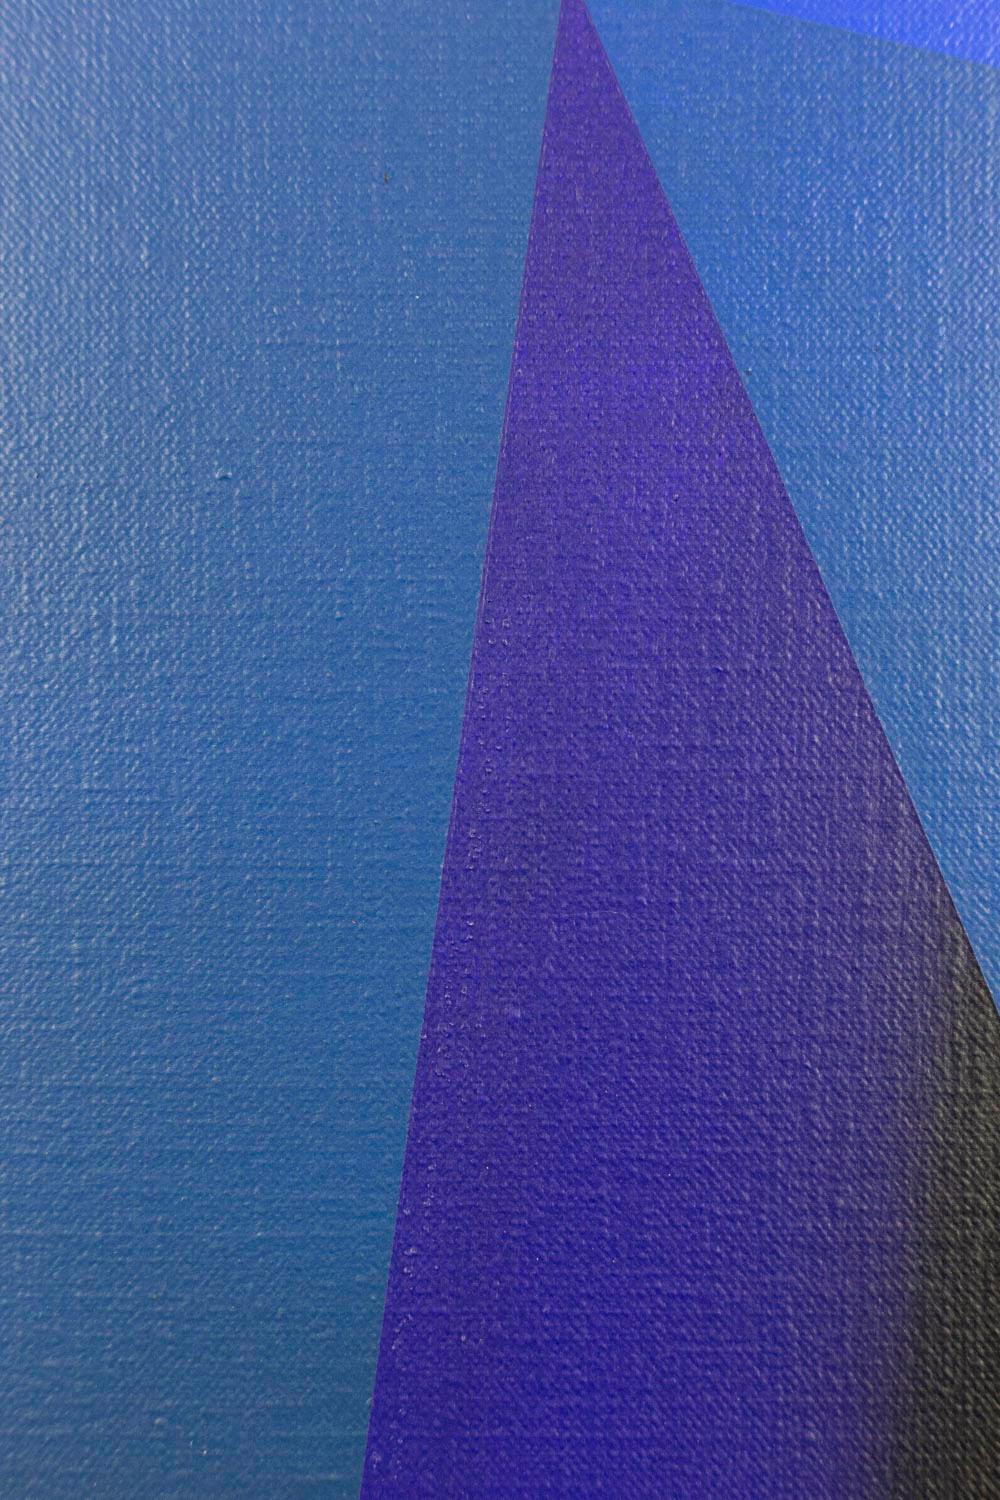 Painting representing geometric shapes in black tones on a blue background.

Contemporary french work.

Dimensions : H 74 x W 54 x D 5 cm

Reference : LS47841251.